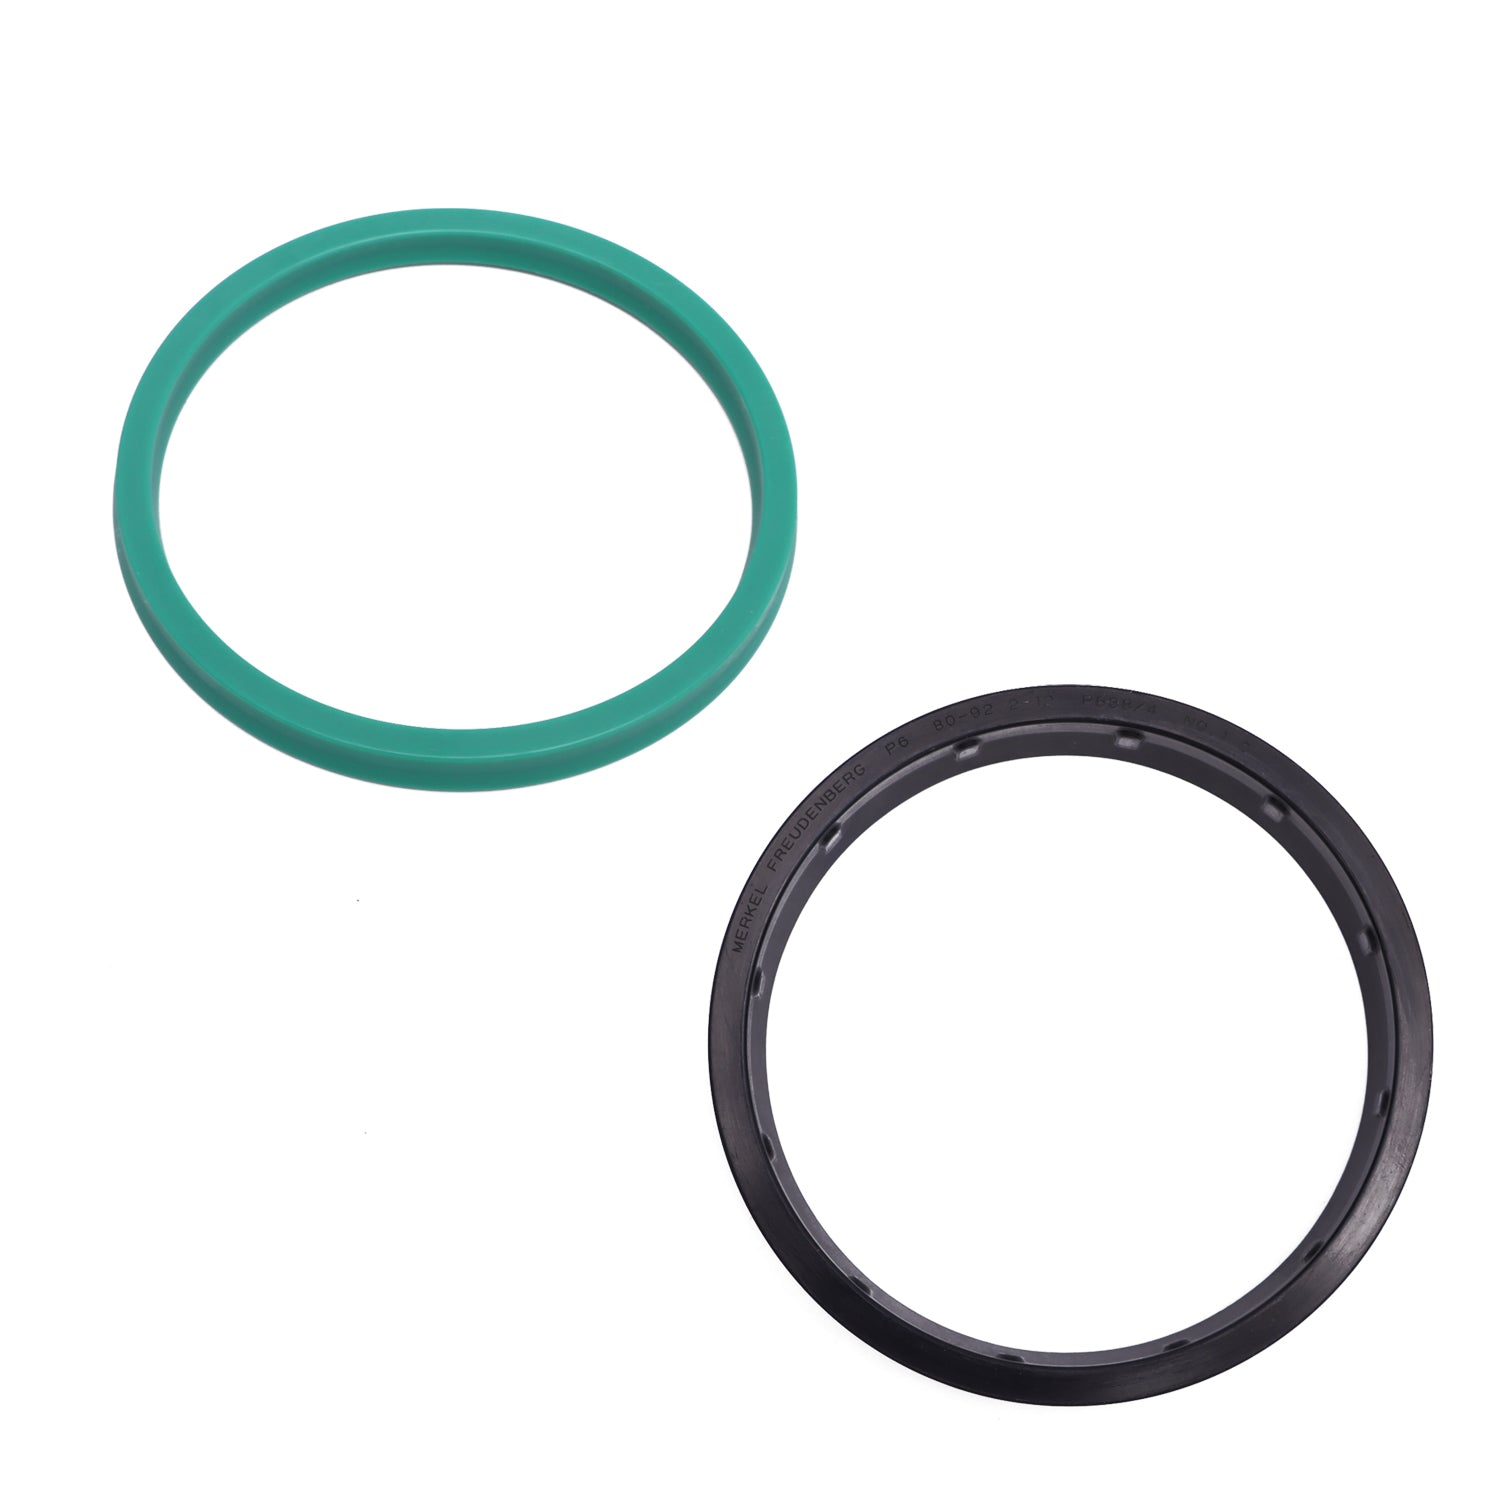 Differential Cylinder 10023479 (DN 130/80) Seal Kit for Schwing Truck-Mounted Concrete Pump, Main Hydraulic Oil Cylinder Sealing Kit for Schwing Stetter Boom Pump. - KUDUPARTS